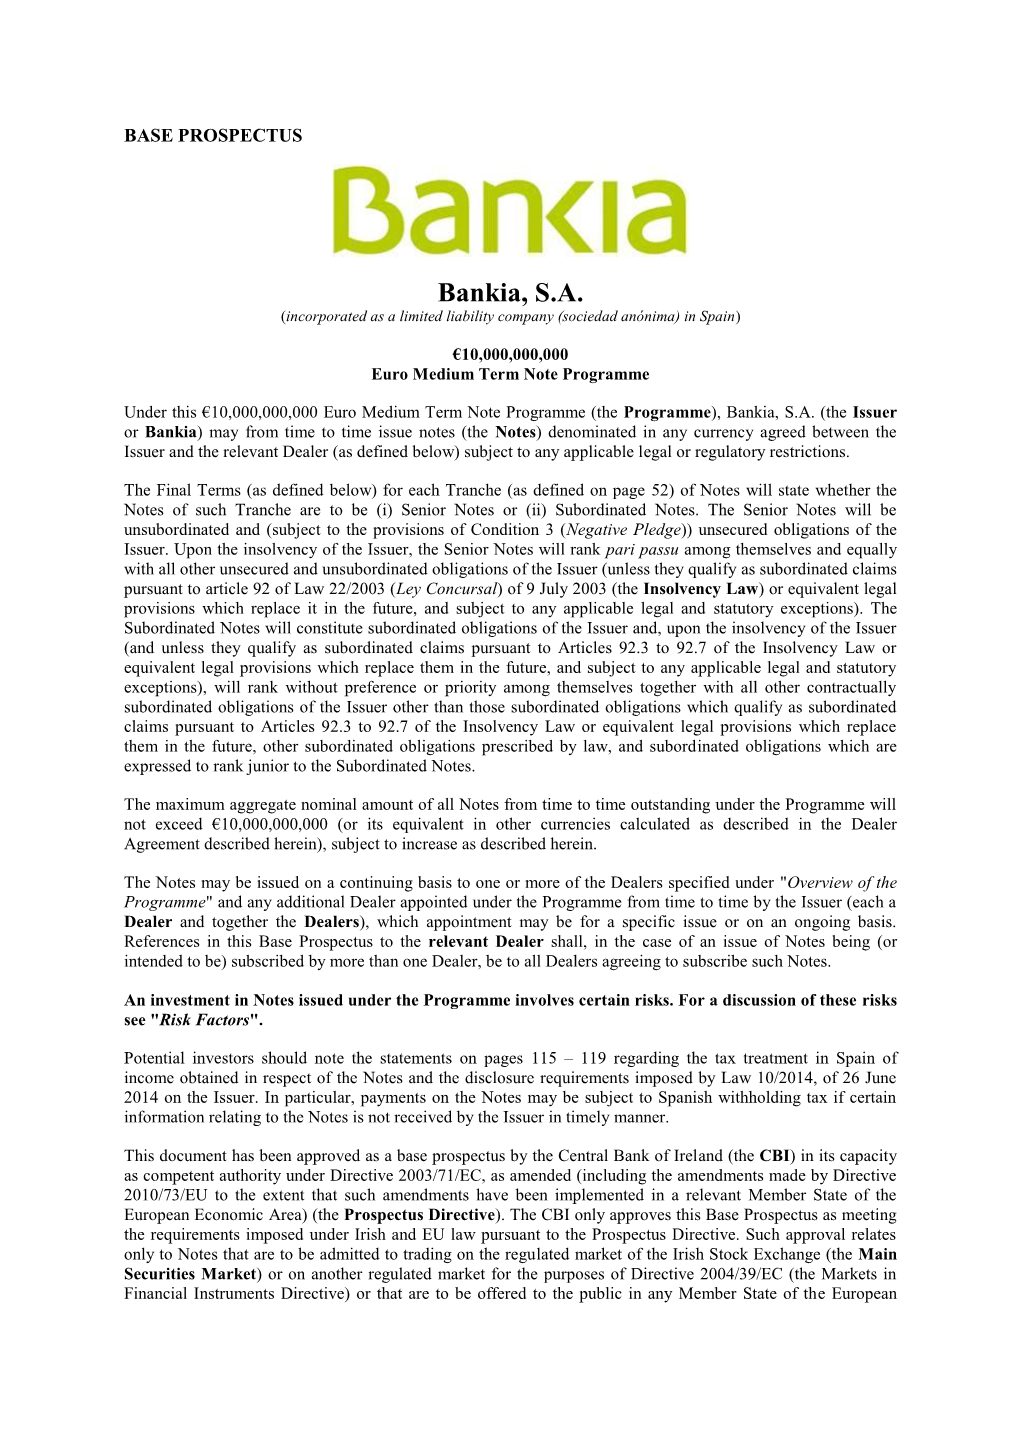 Bankia, S.A. (Incorporated As a Limited Liability Company (Sociedad Anónima) in Spain)